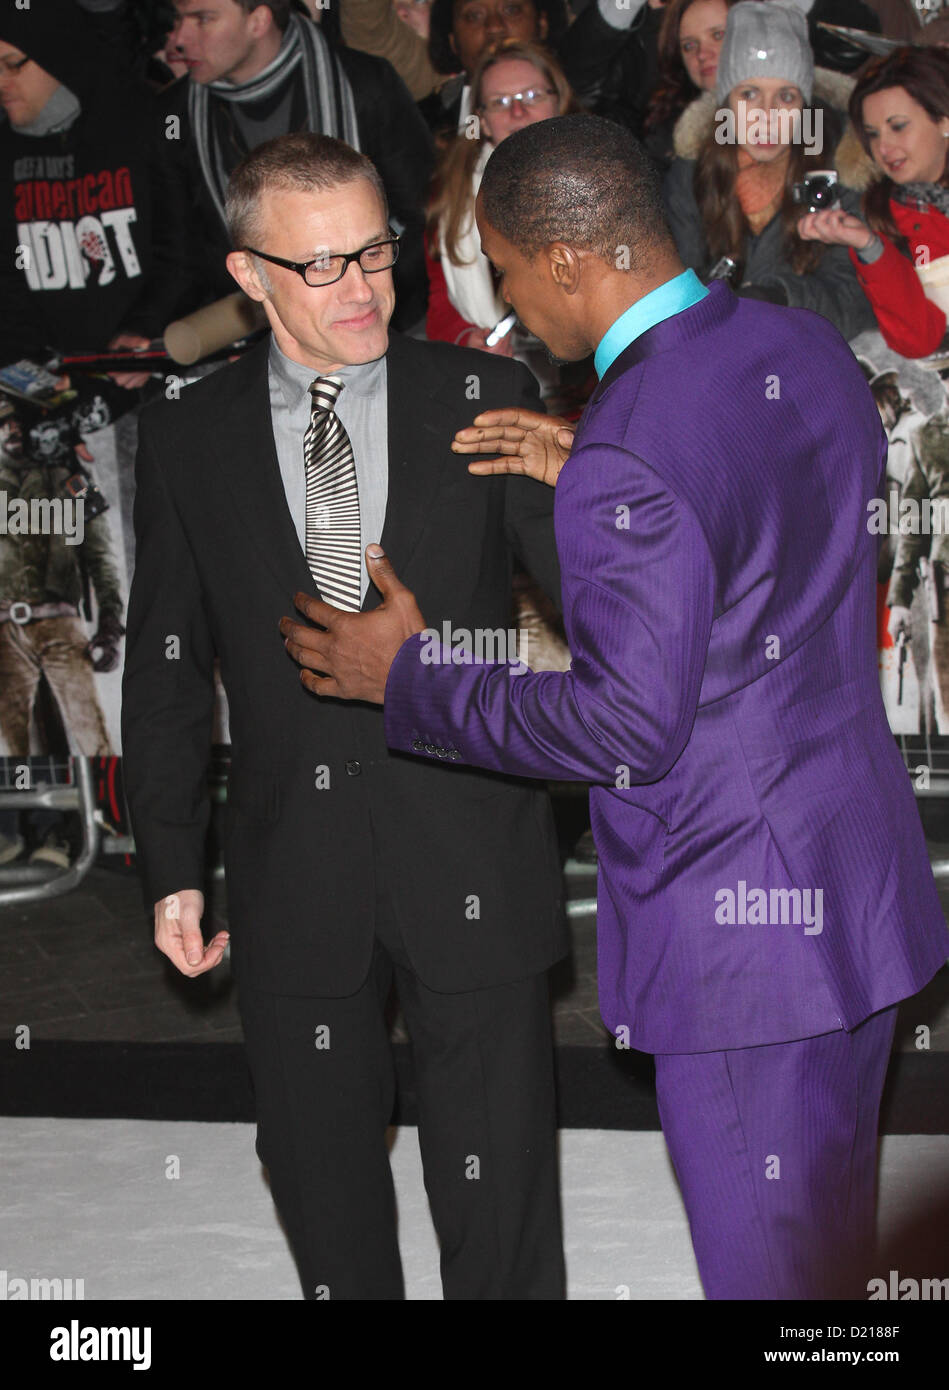 Jamie Foxx and Christoph Waltz arrive for the Django Unchained - UK film premiere in Leicester Square. Stock Photo